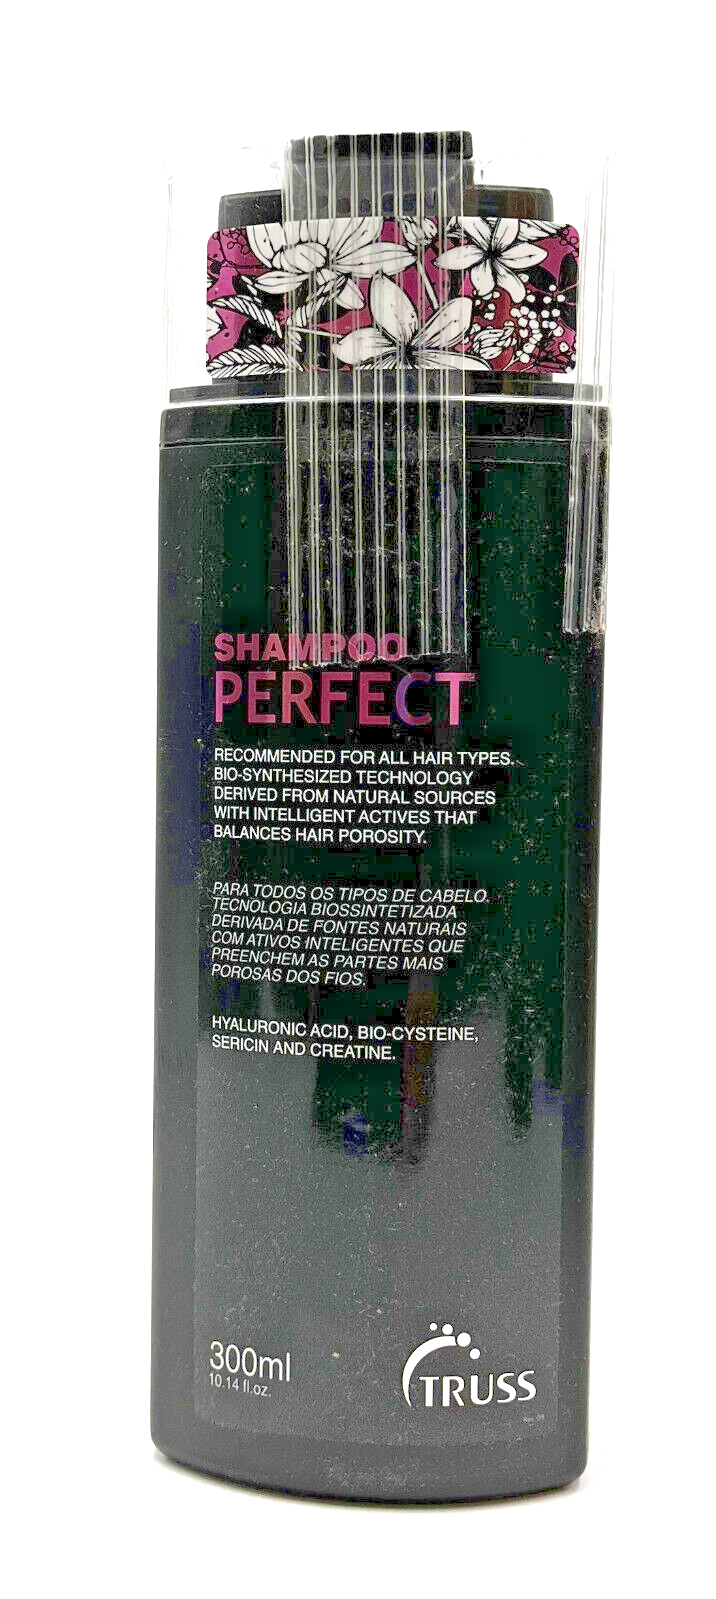 Primary image for Truss Perfect Shampoo For All Hair Types 10.14 oz